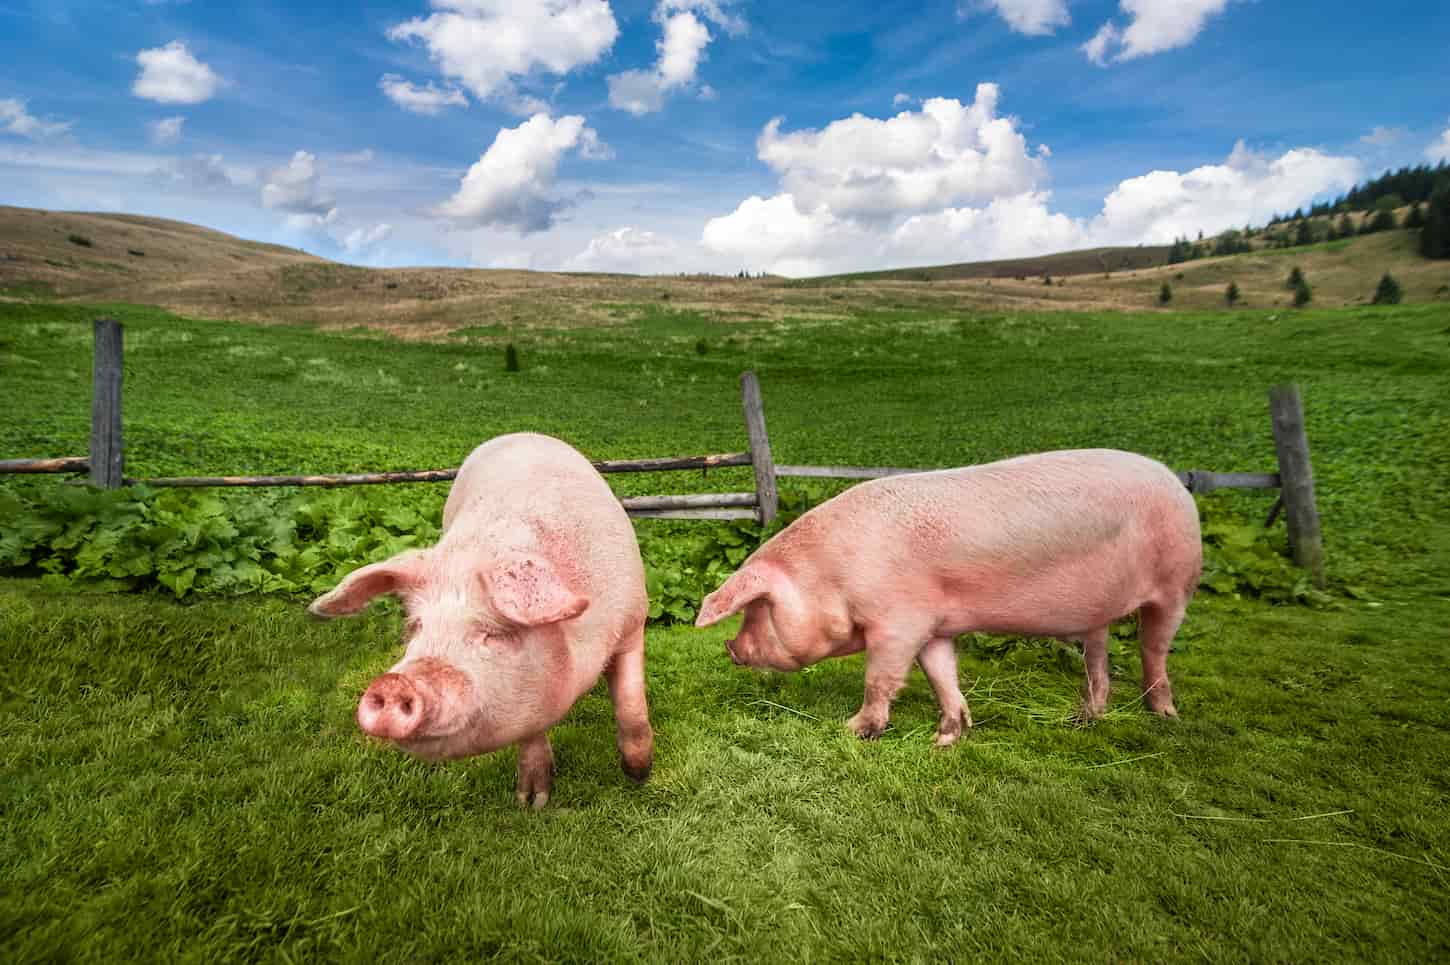 An image of two pigs eating in the backyard.